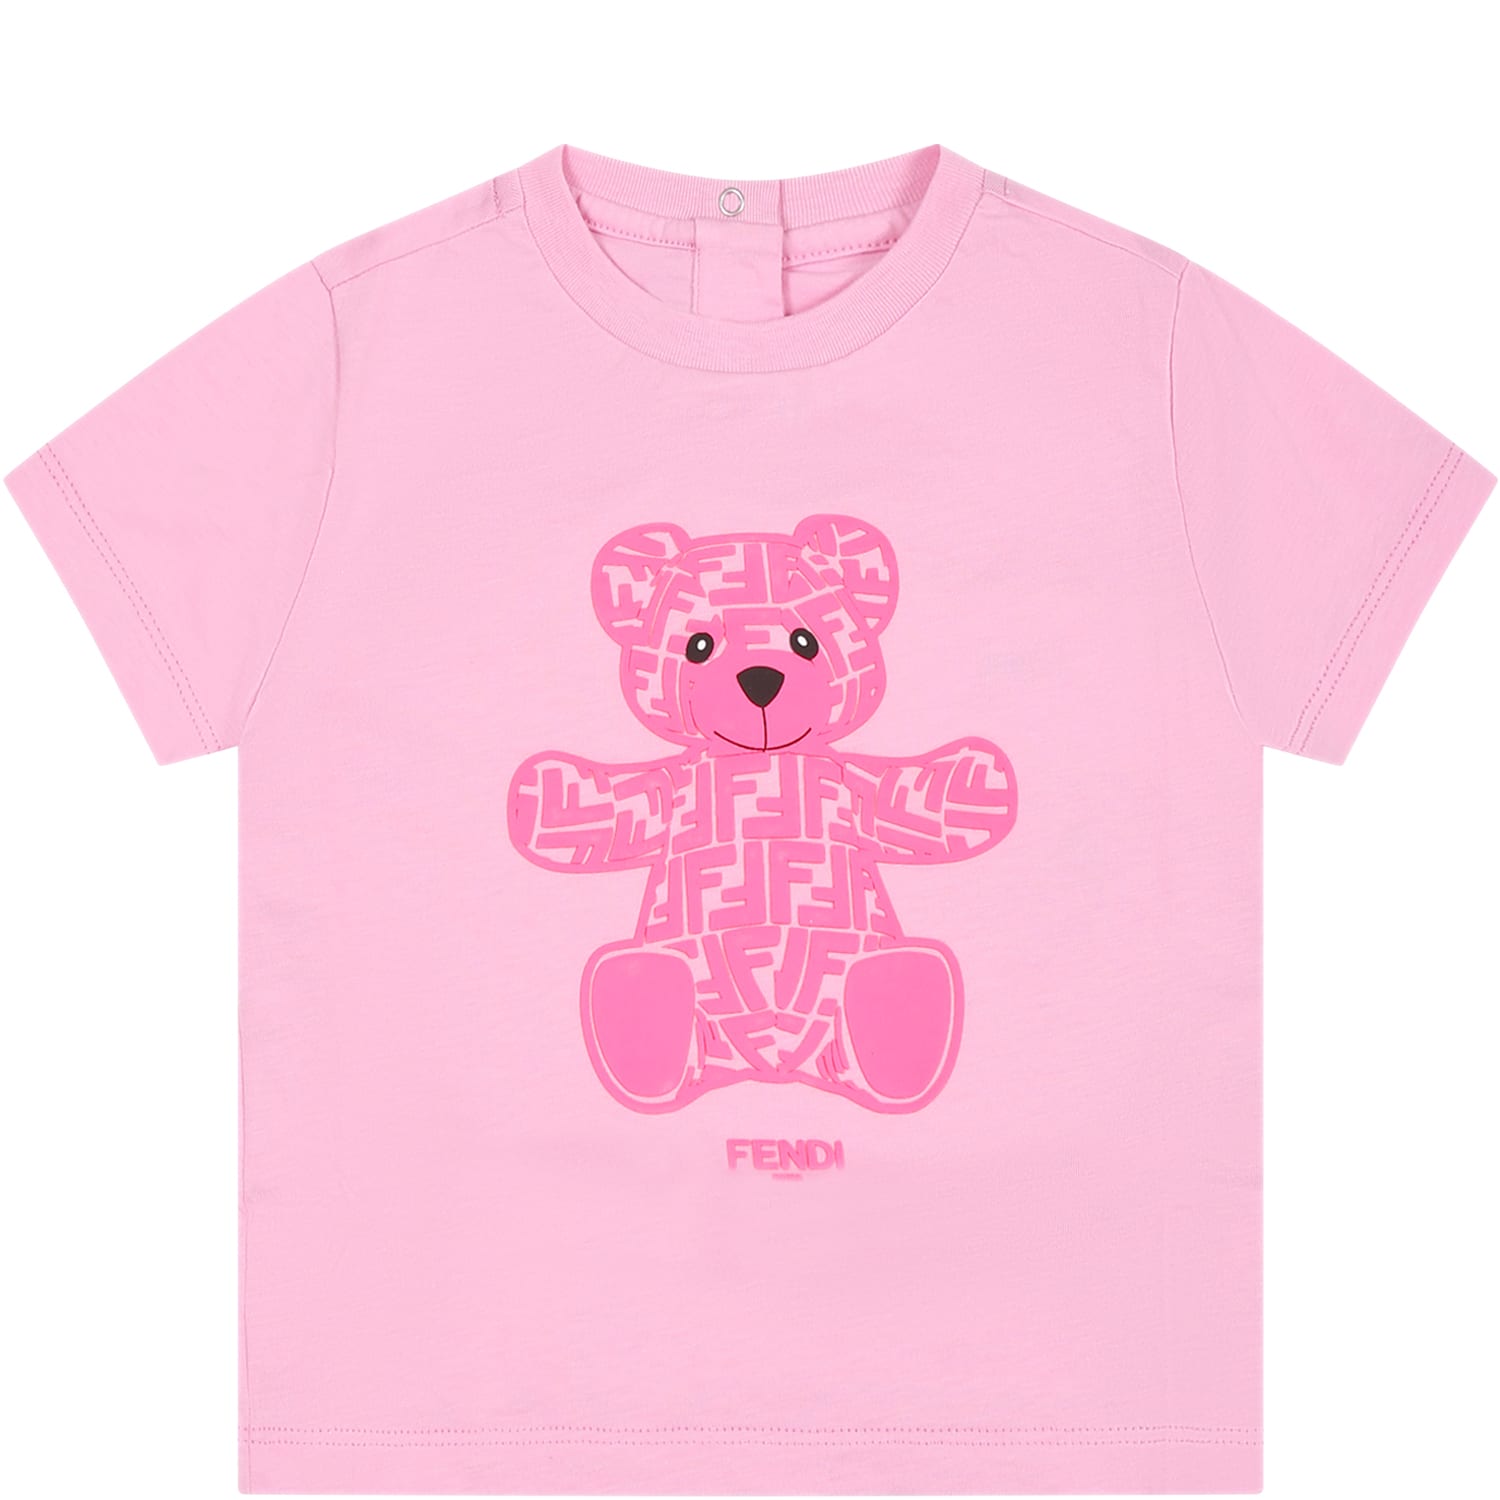 Fendi Pink T-shirt For Girl With Teddy Bear